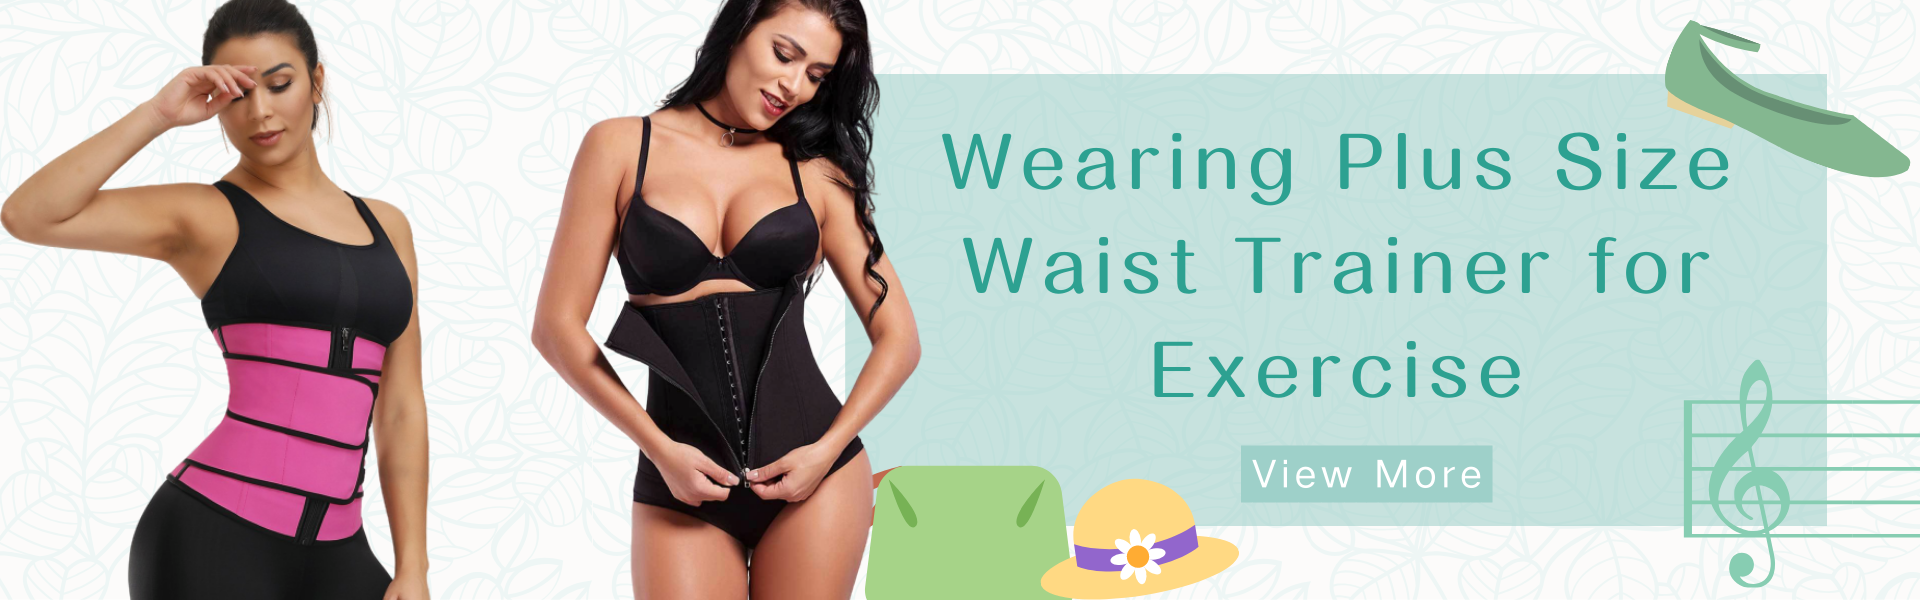 Wearing Plus Size Waist Trainer for Exercise